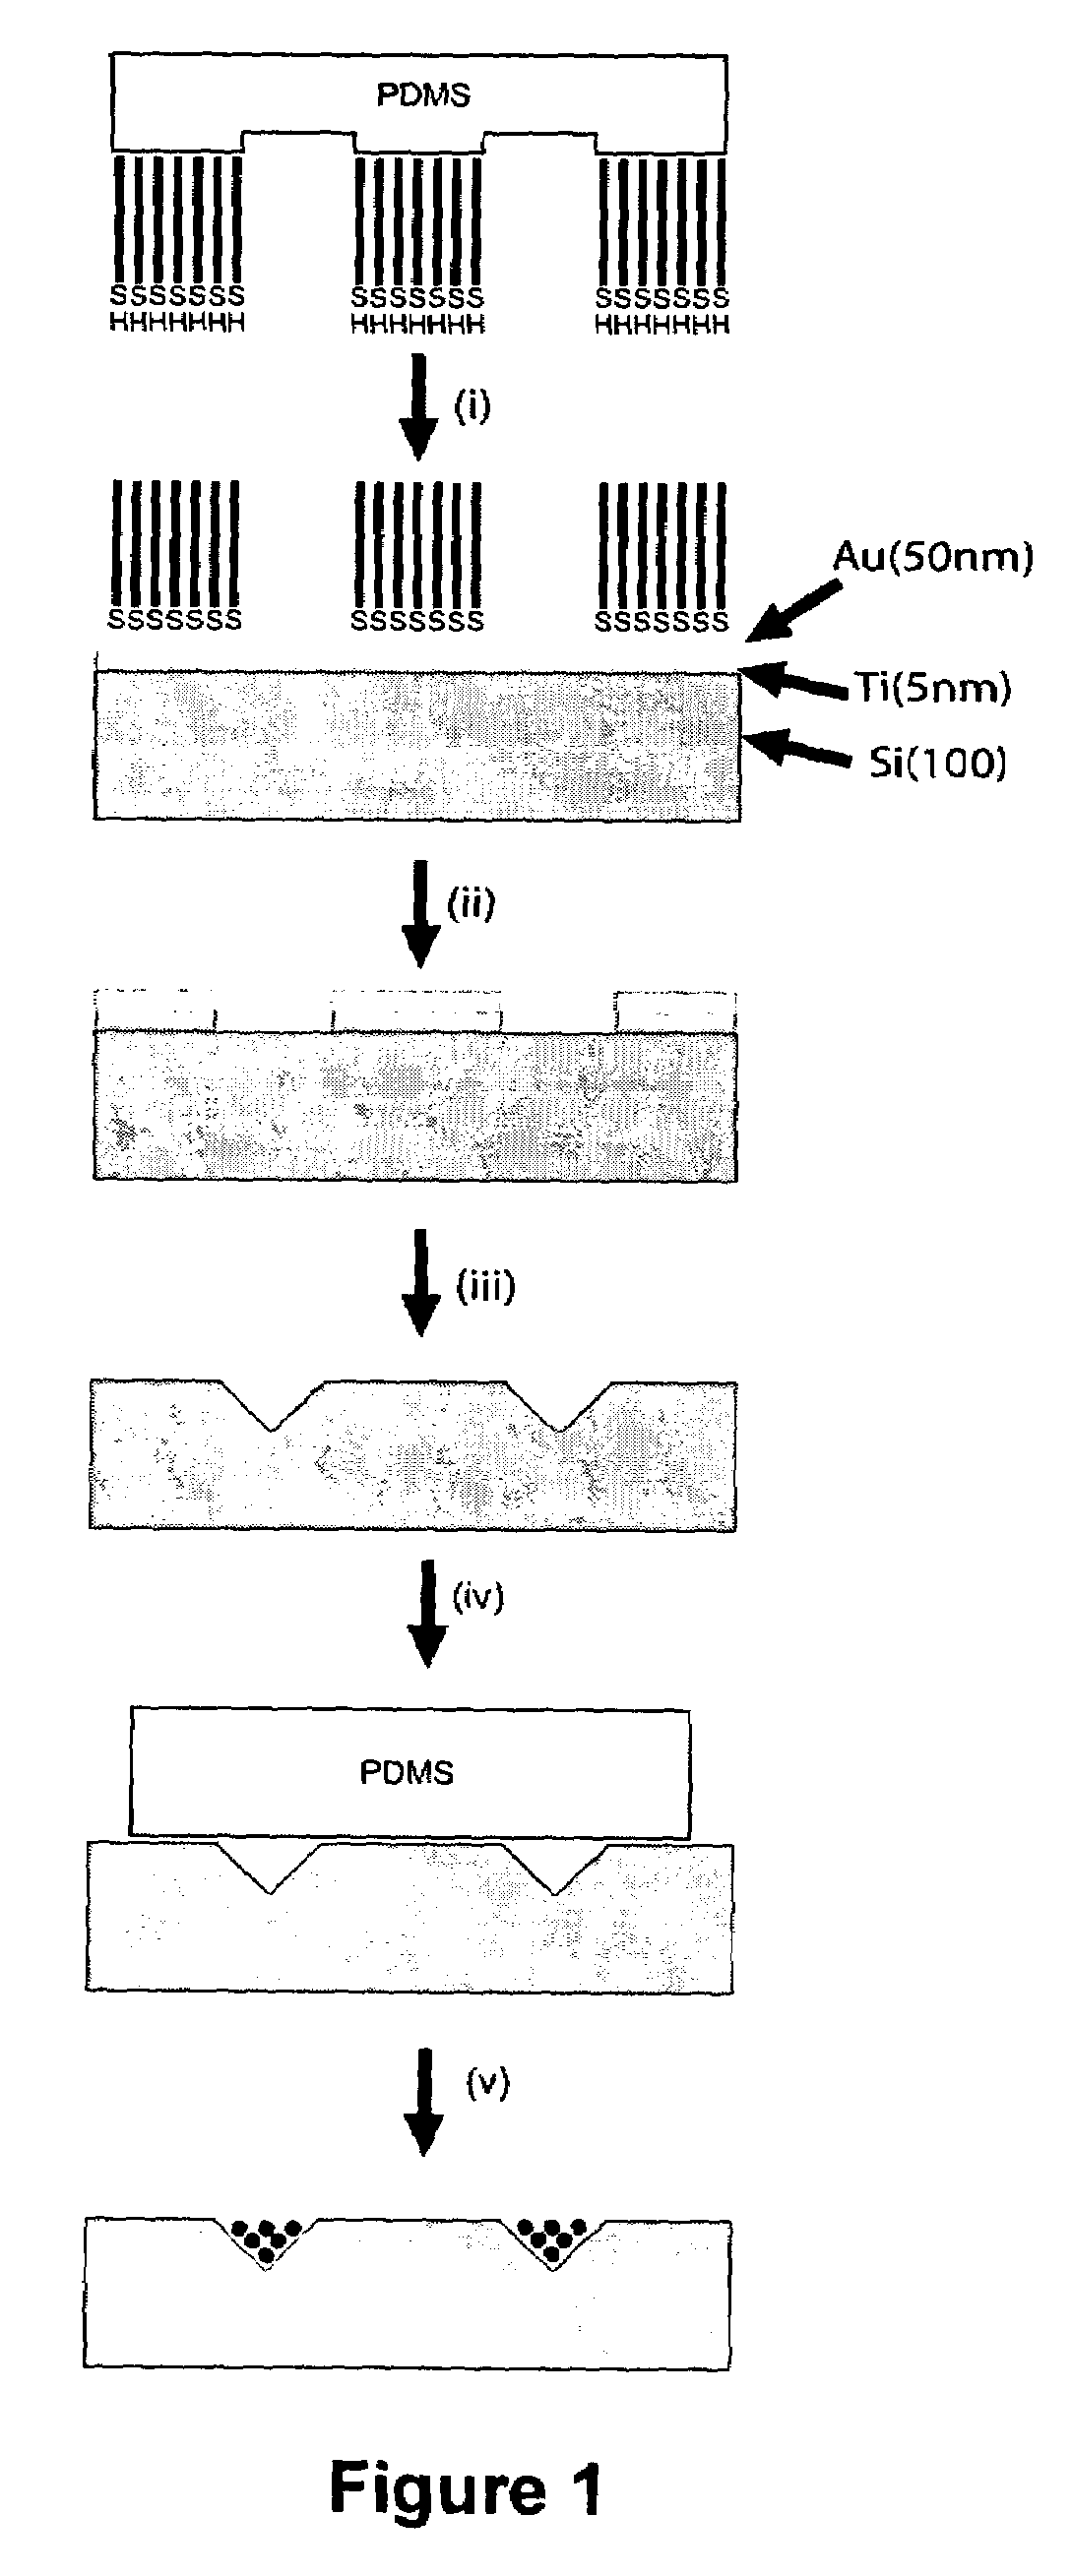 Method of self-assembly and optical applications of crystalline colloidal patterns on substrates